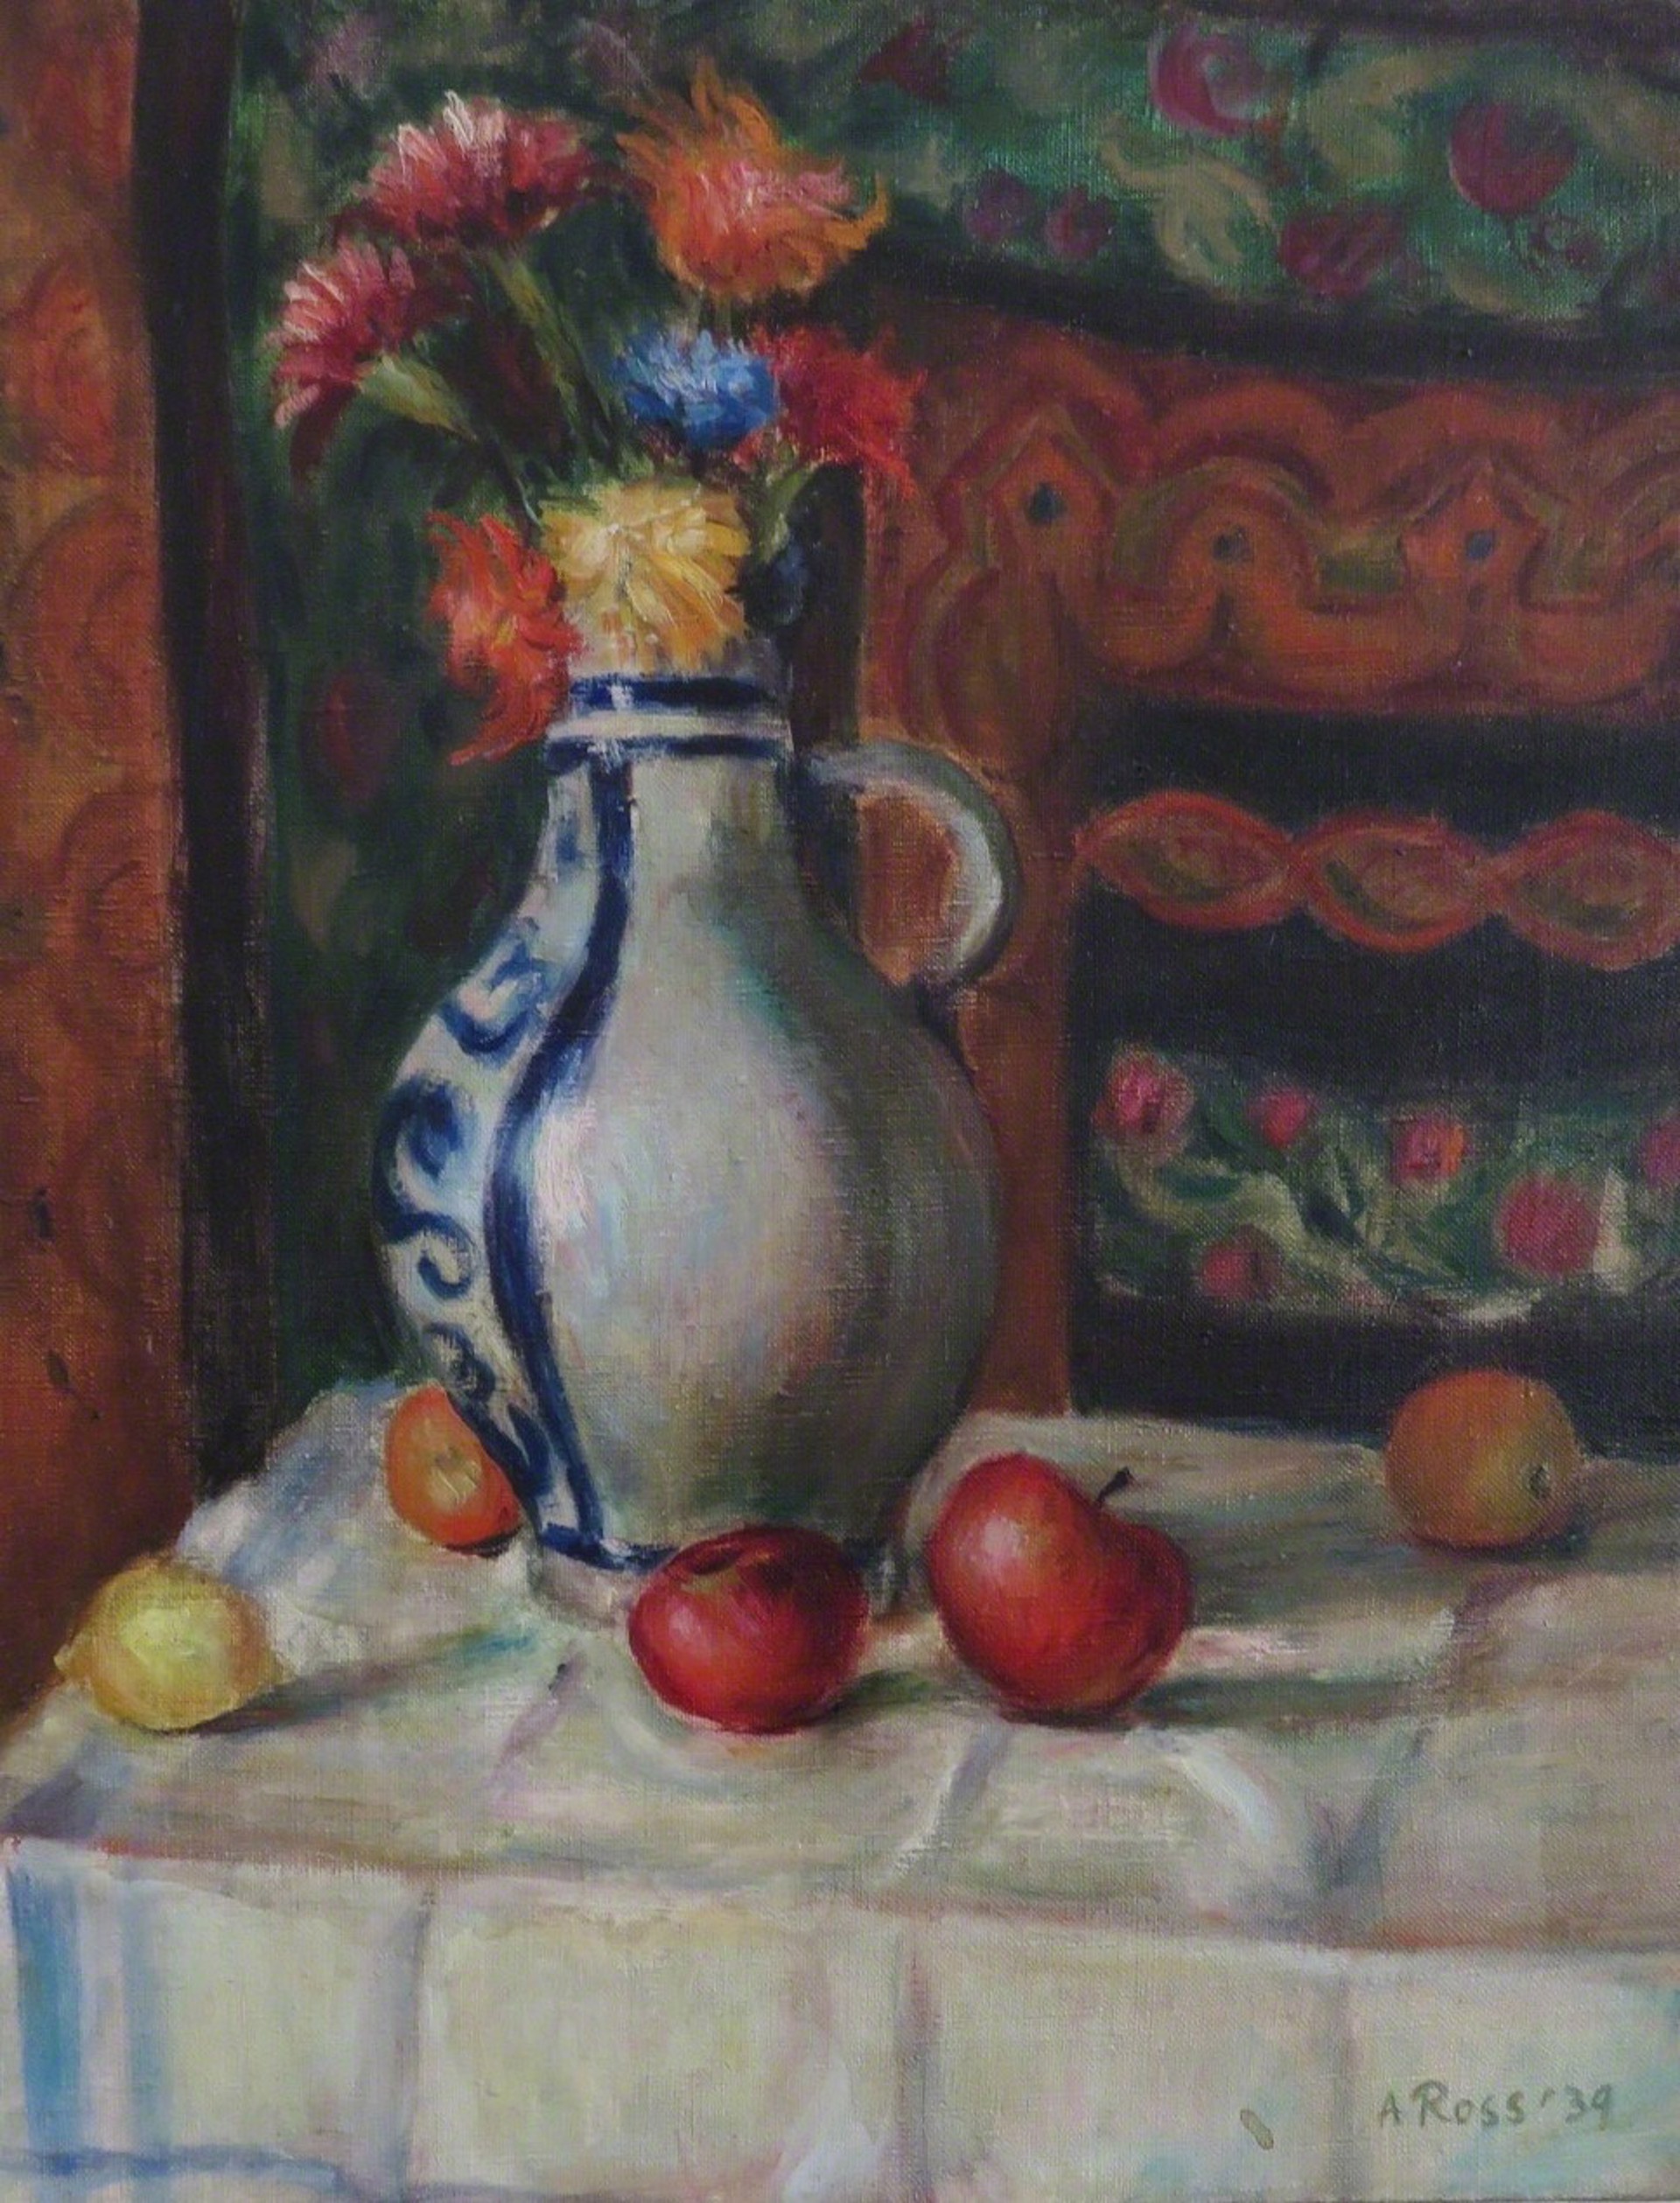 Chrysanthemums and Apples by Alvin Ross